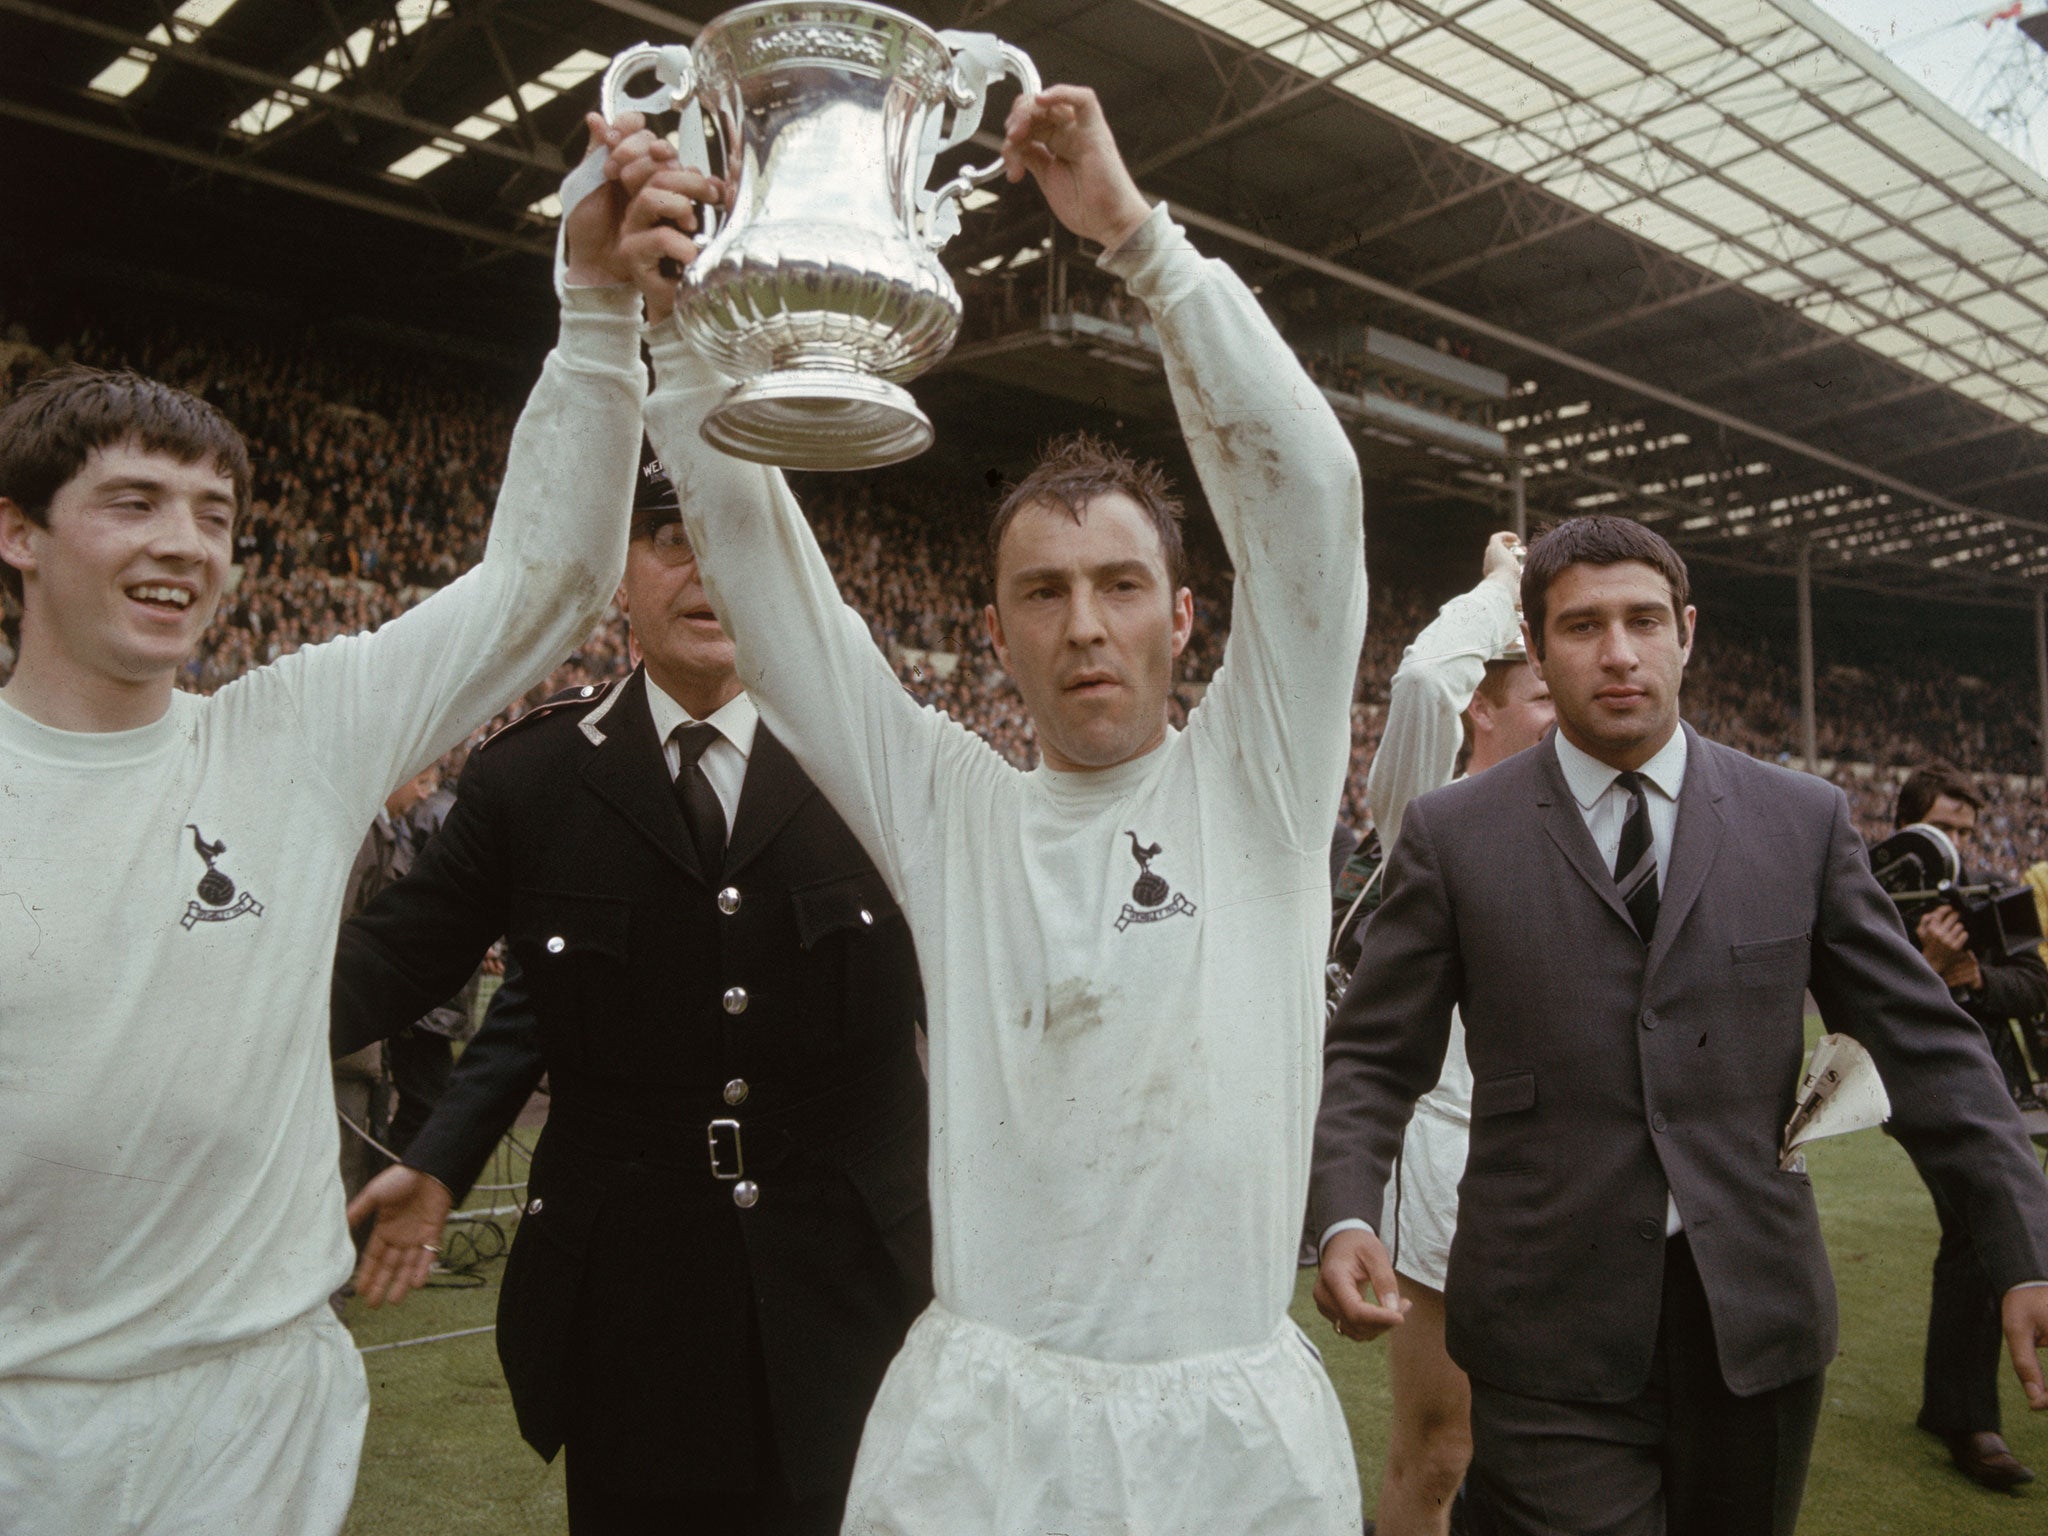 Joe Kinnear and Jimmy Greaves of Tottenham Hotspur football club celebrate after beating Chelsea in the FA Cup Final.